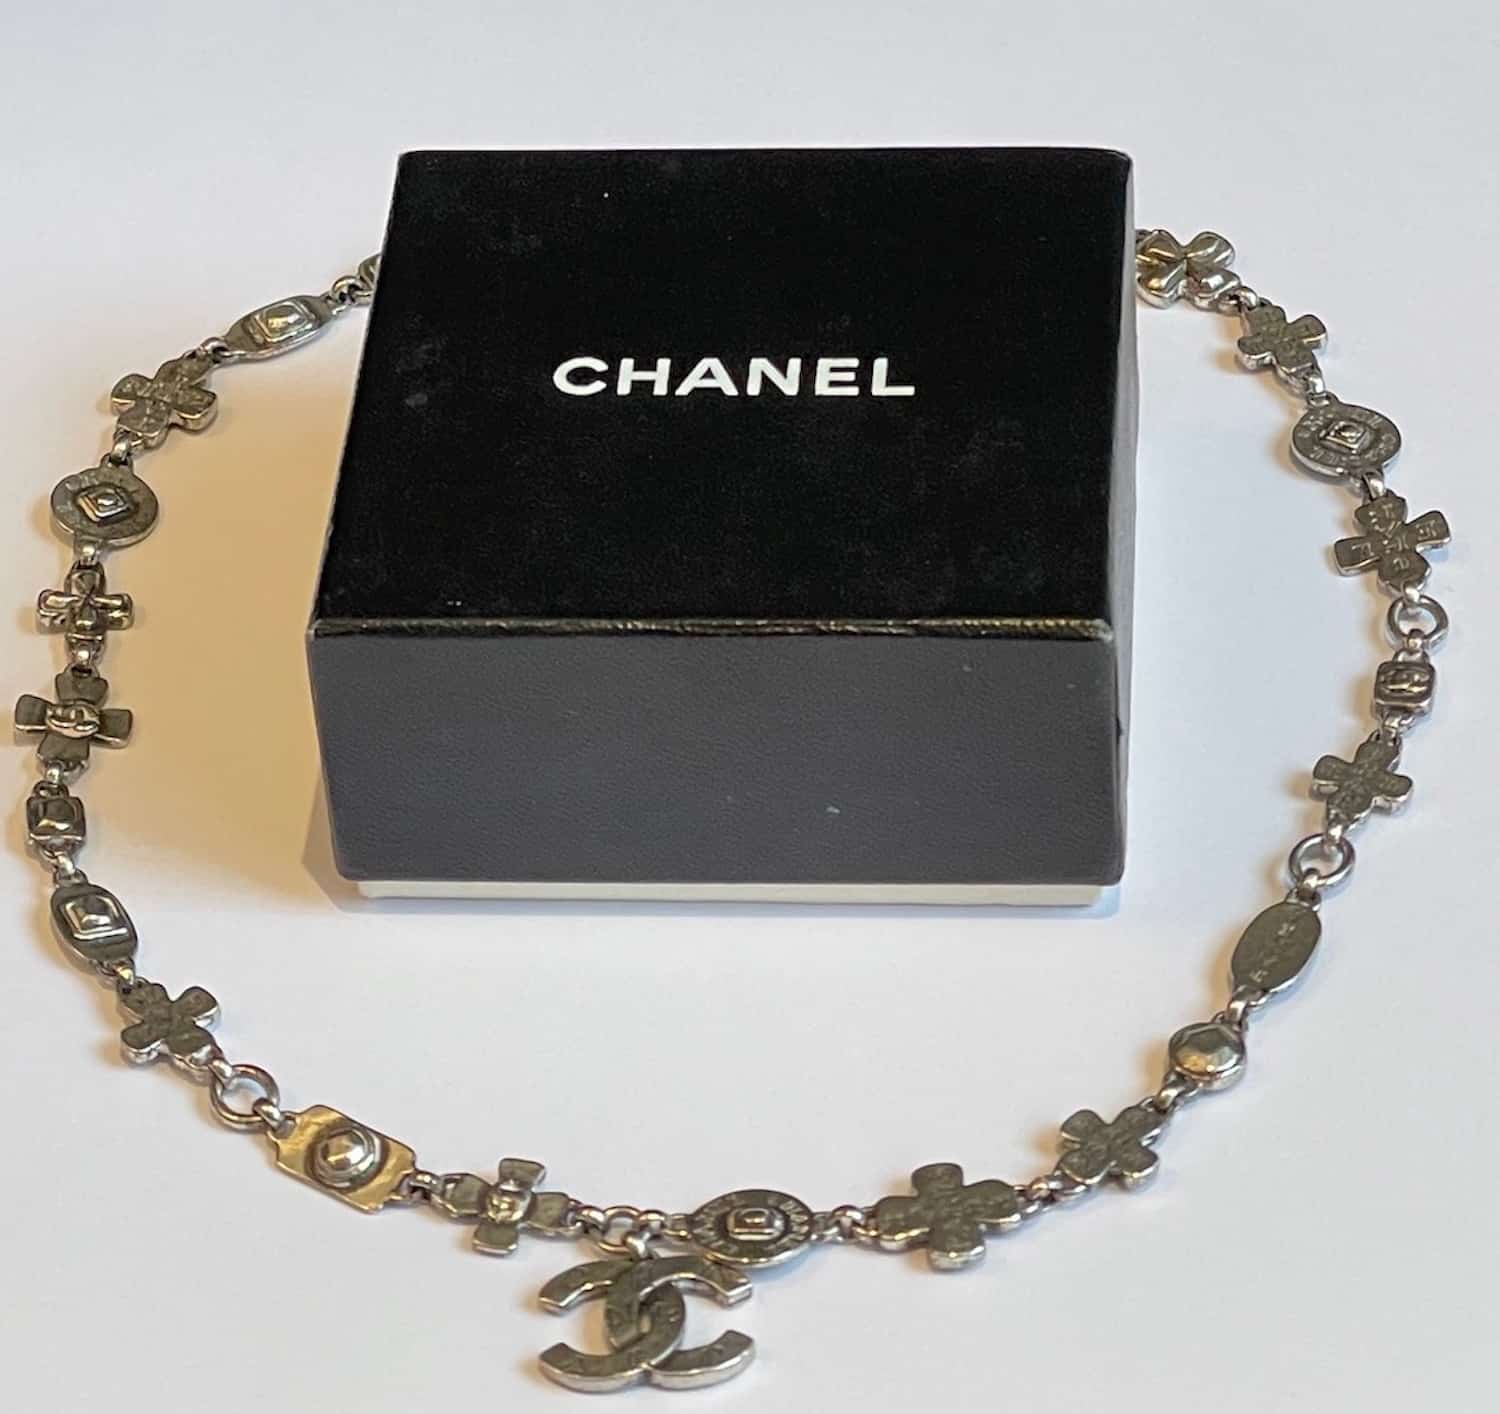 Chanel Resin Clover Pendant Necklace | Rent Chanel jewelry for $55/month -  Join Switch